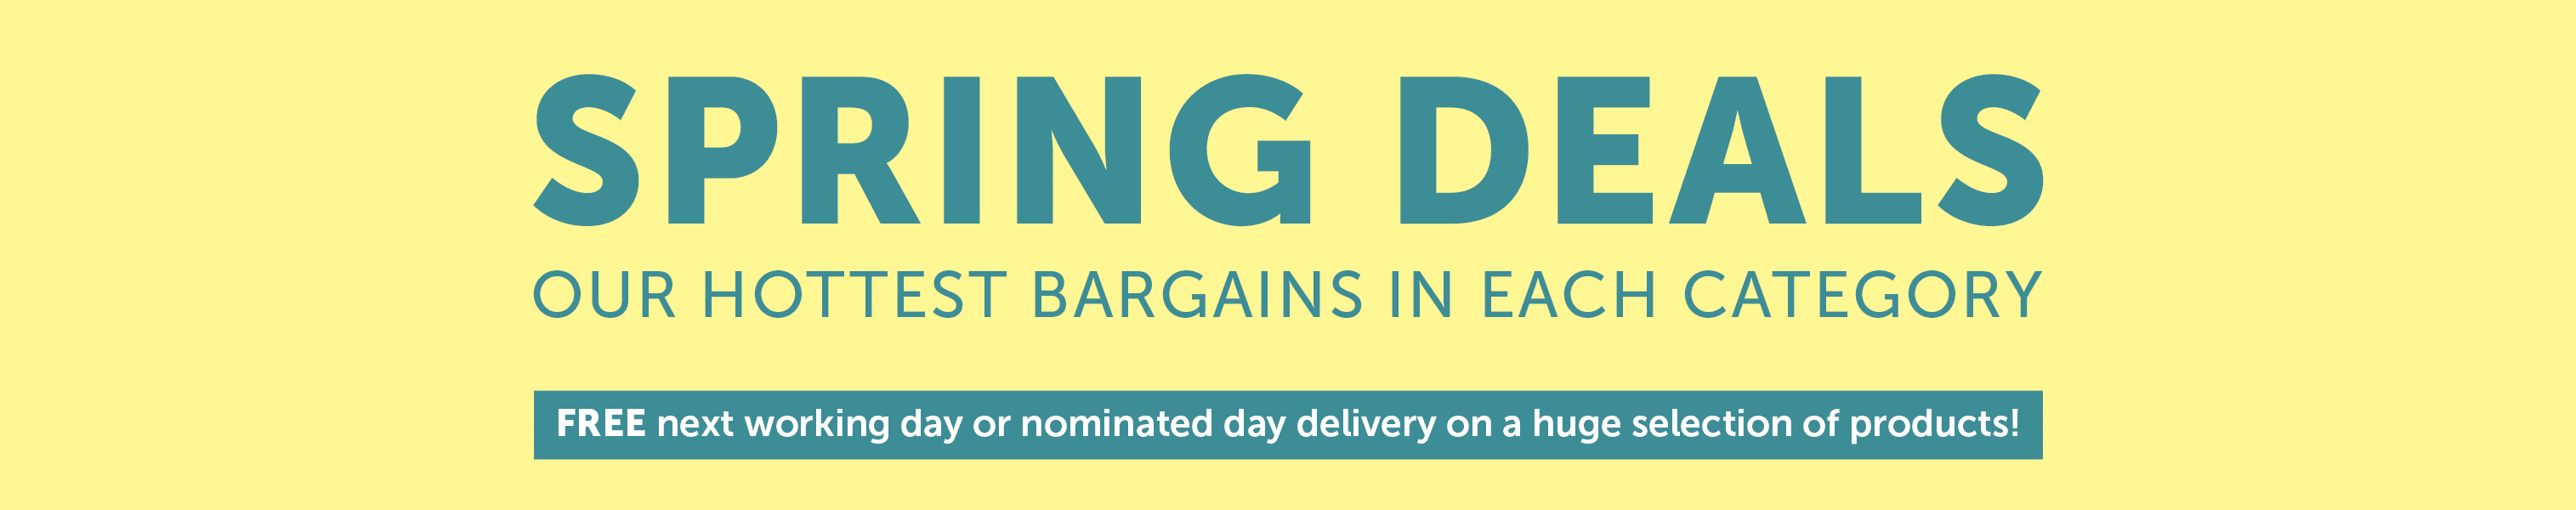 Spring Deals - Our hottest bargains in each category